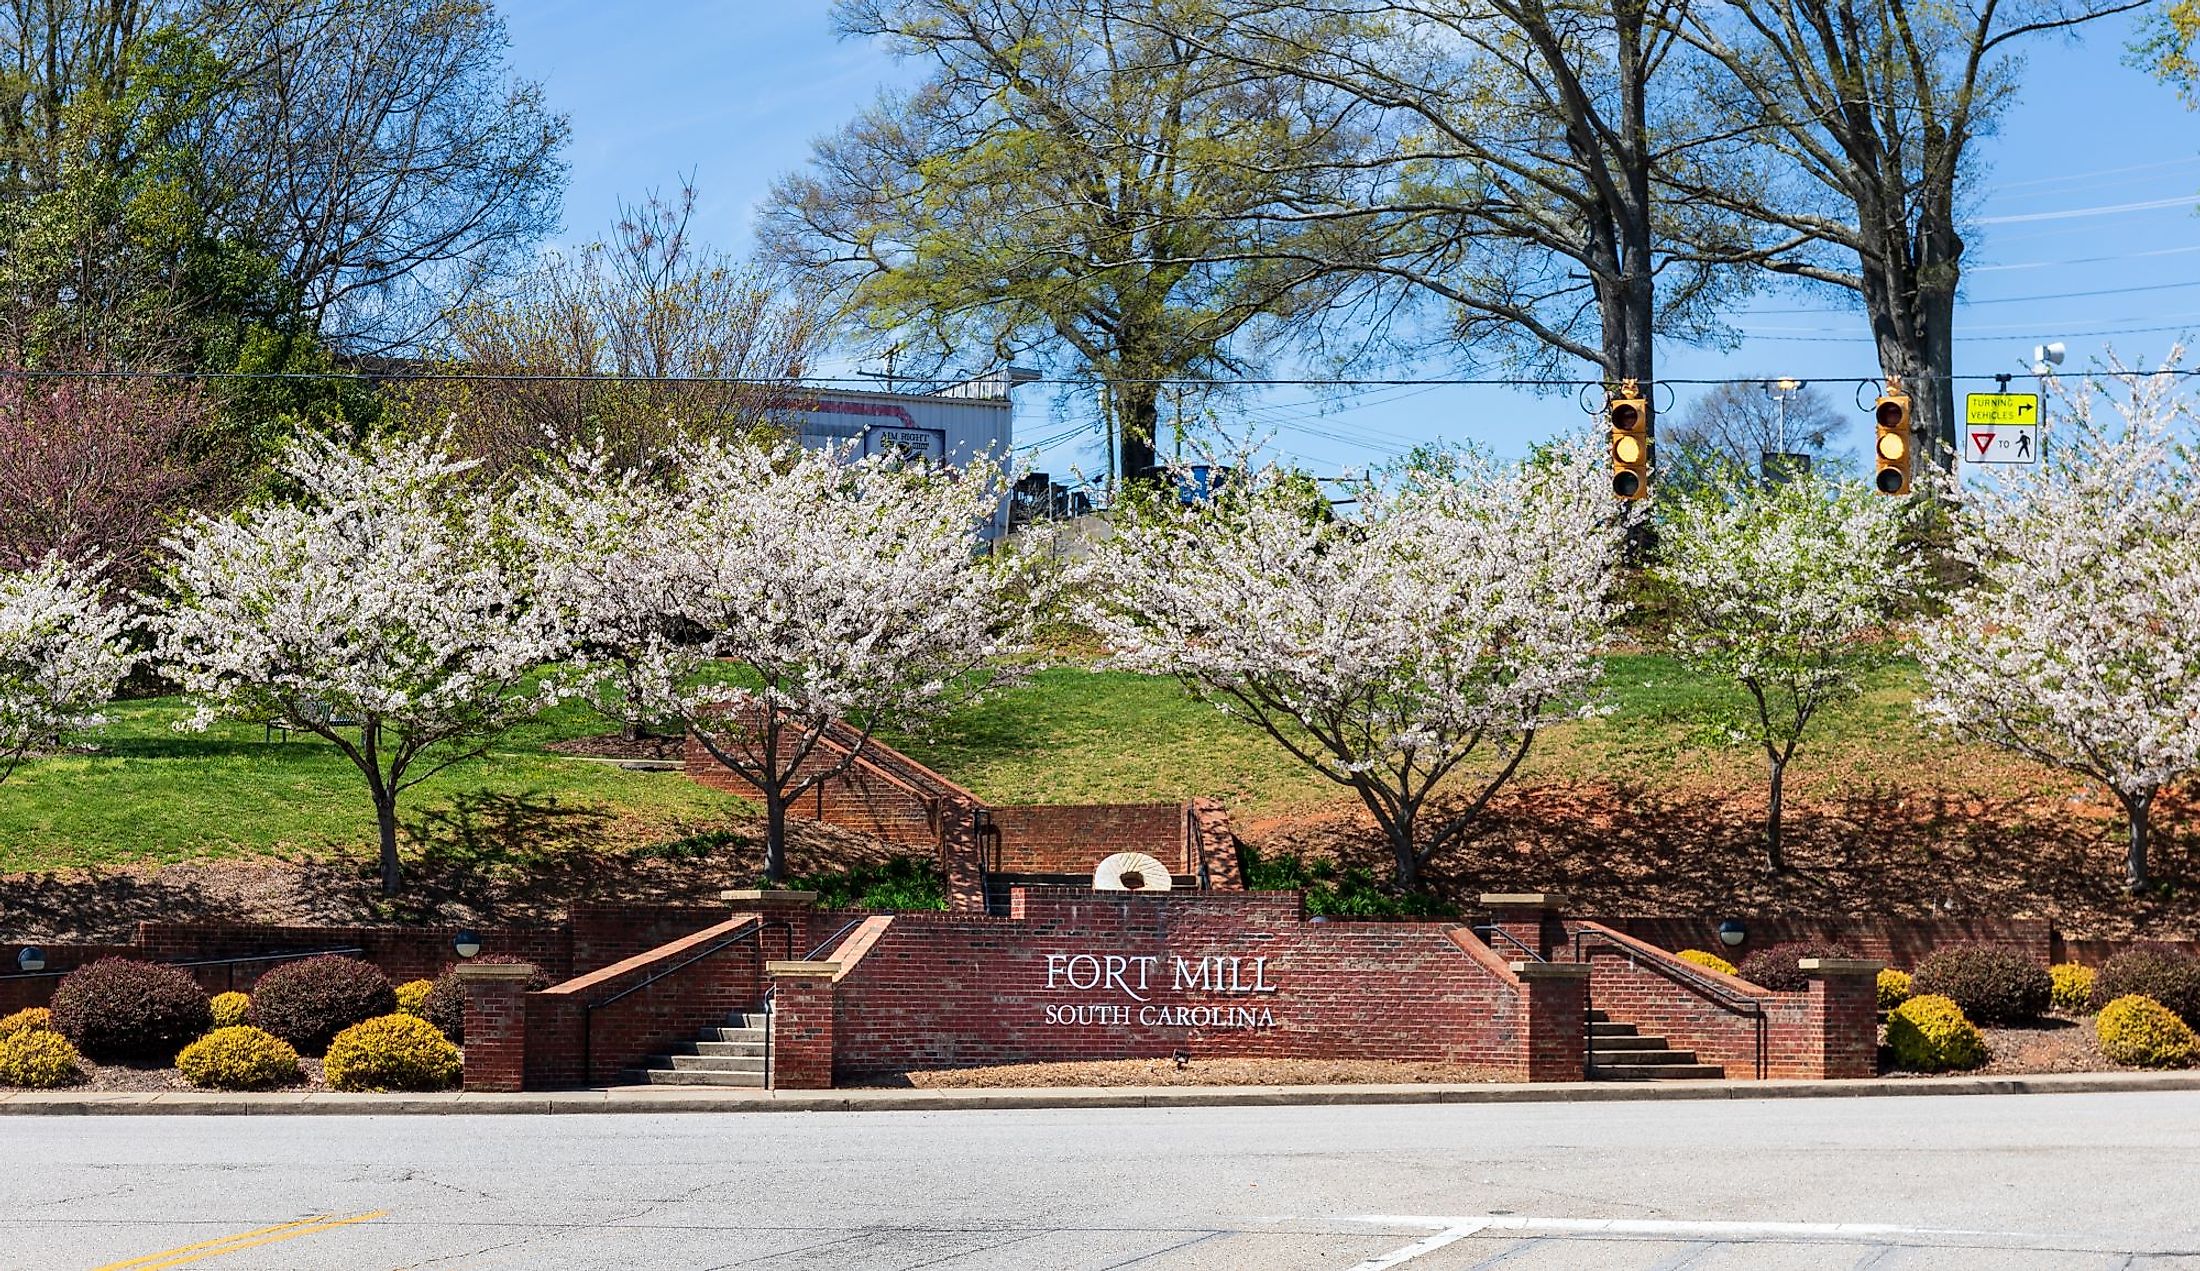 "Fort Mill" sign on a brick wall with blooming dogwoods at entrance to Main Street in Fort Mill, South Carolina. Editorial credit: Nolichuckyjake / Shutterstock.com